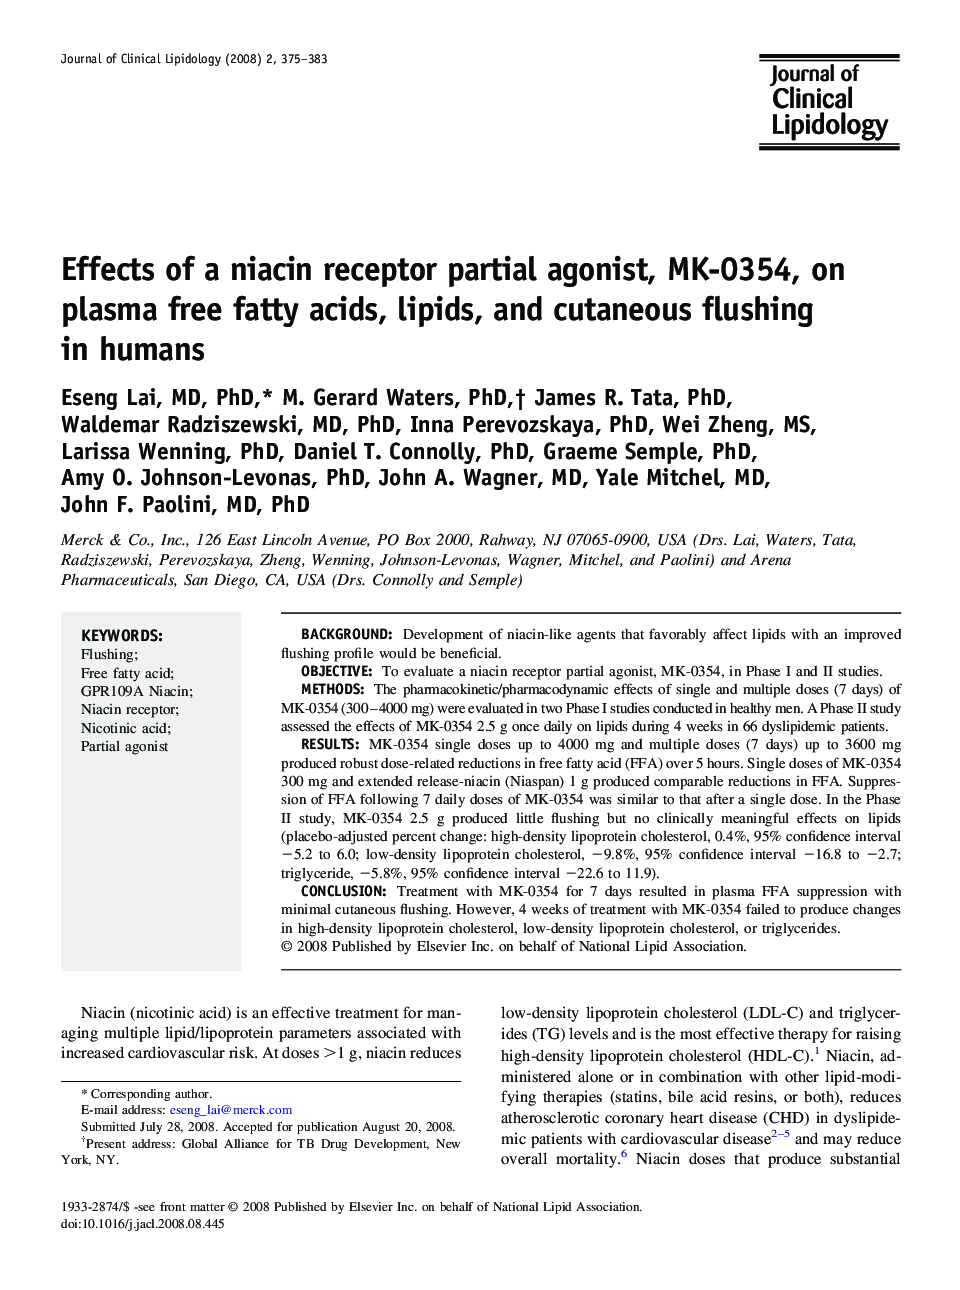 Effects of a niacin receptor partial agonist, MK-0354, on plasma free fatty acids, lipids, and cutaneous flushing in humans